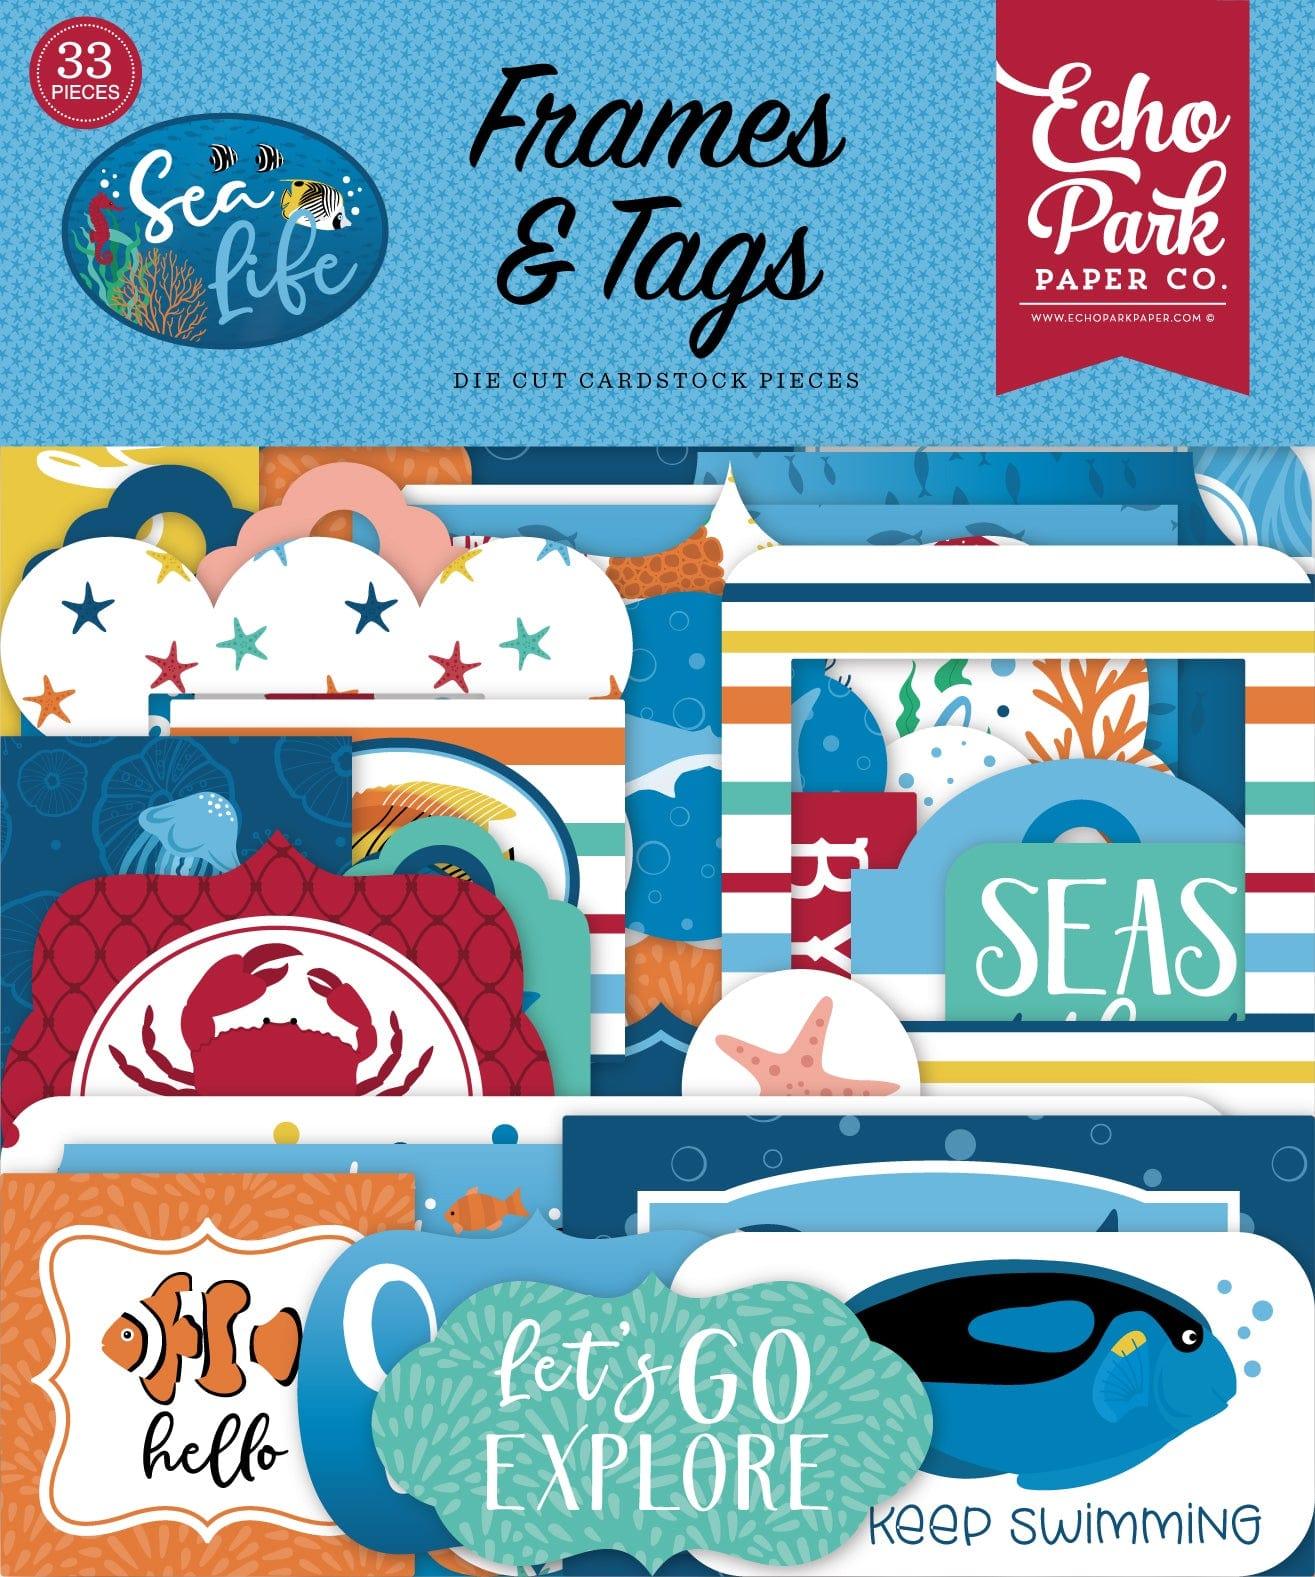 Sea Life Collection 5 x 5 Scrapbook Tags & Frames Die Cuts by Echo Park Paper - Scrapbook Supply Companies